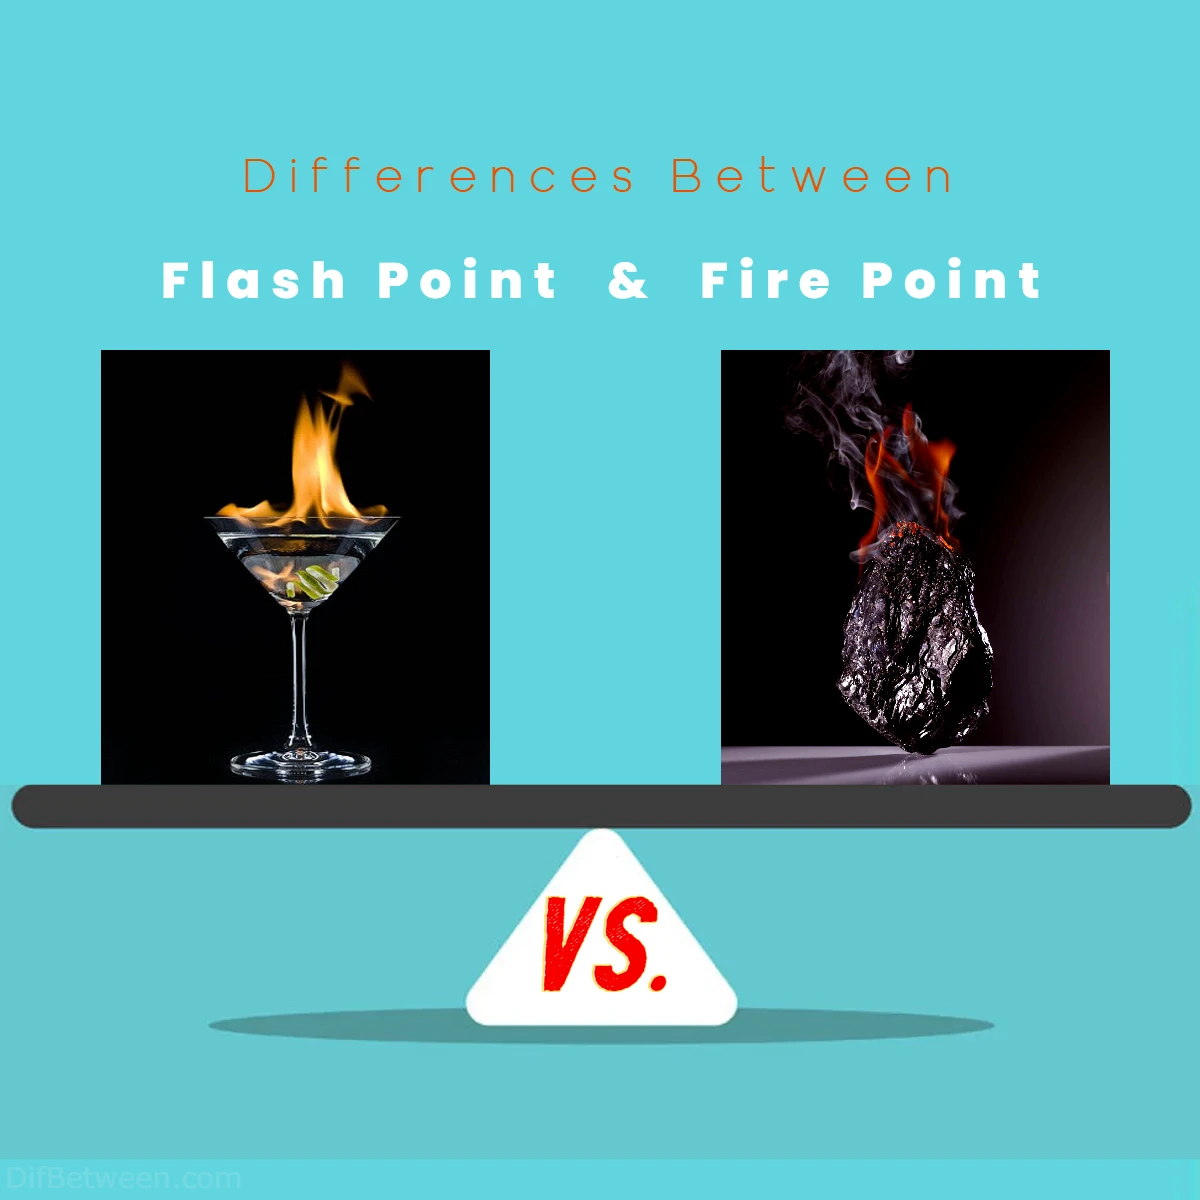 Differences Between Flash Point vs Fire Points